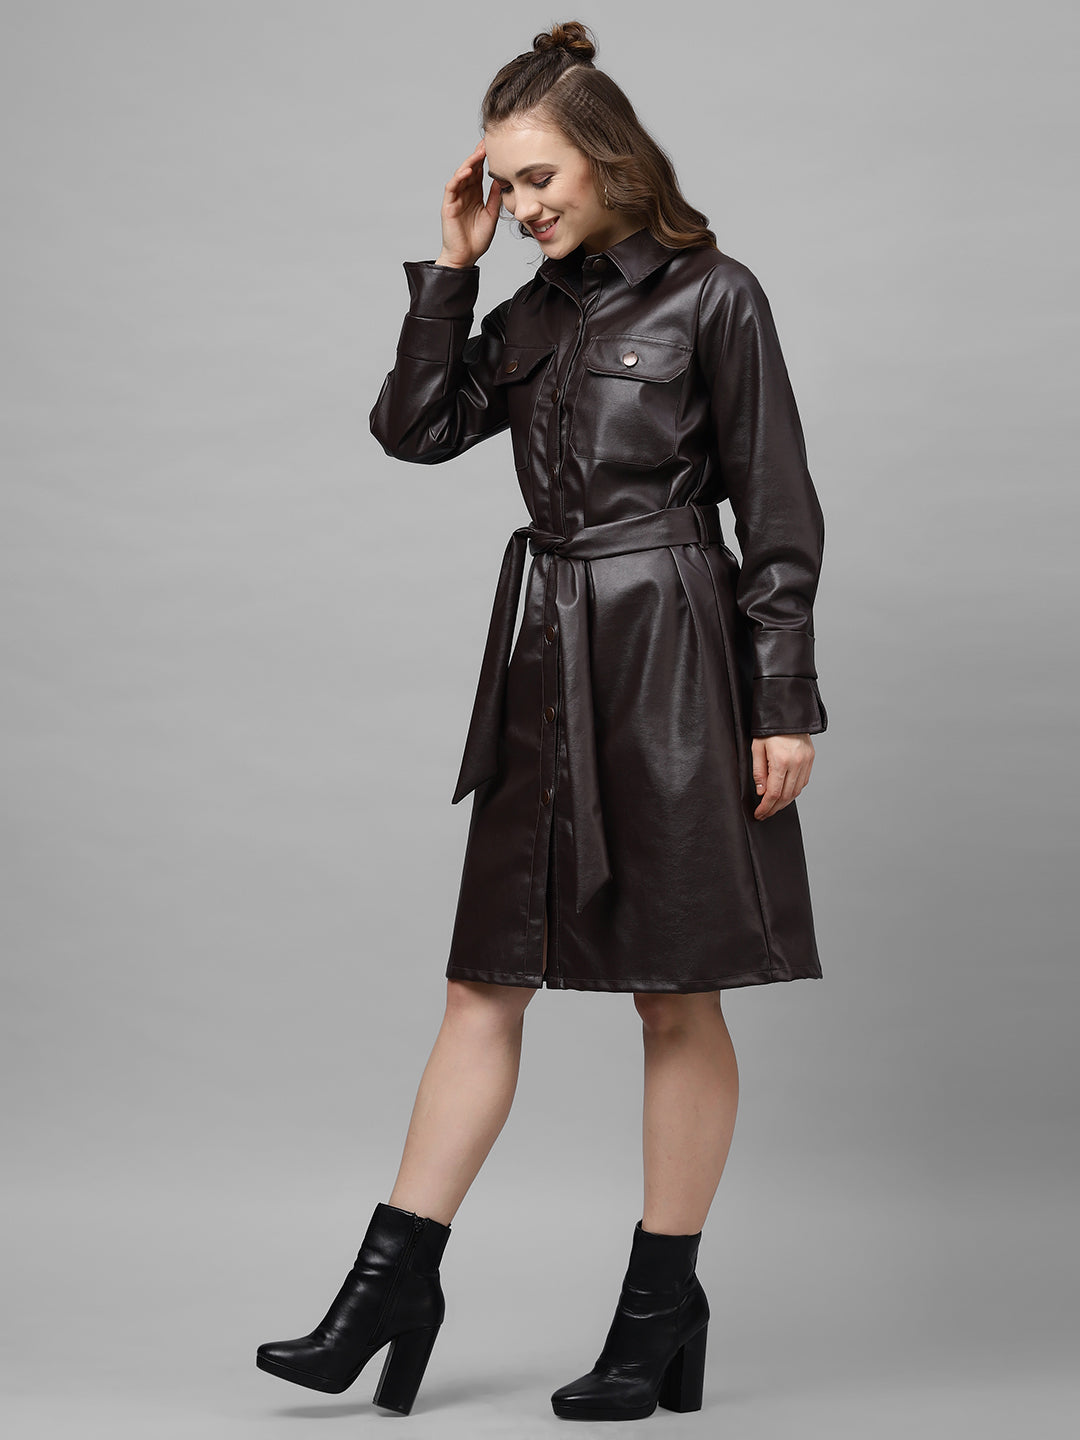 Leather Dresses | Leather Look & PU Dresses | House of Fraser